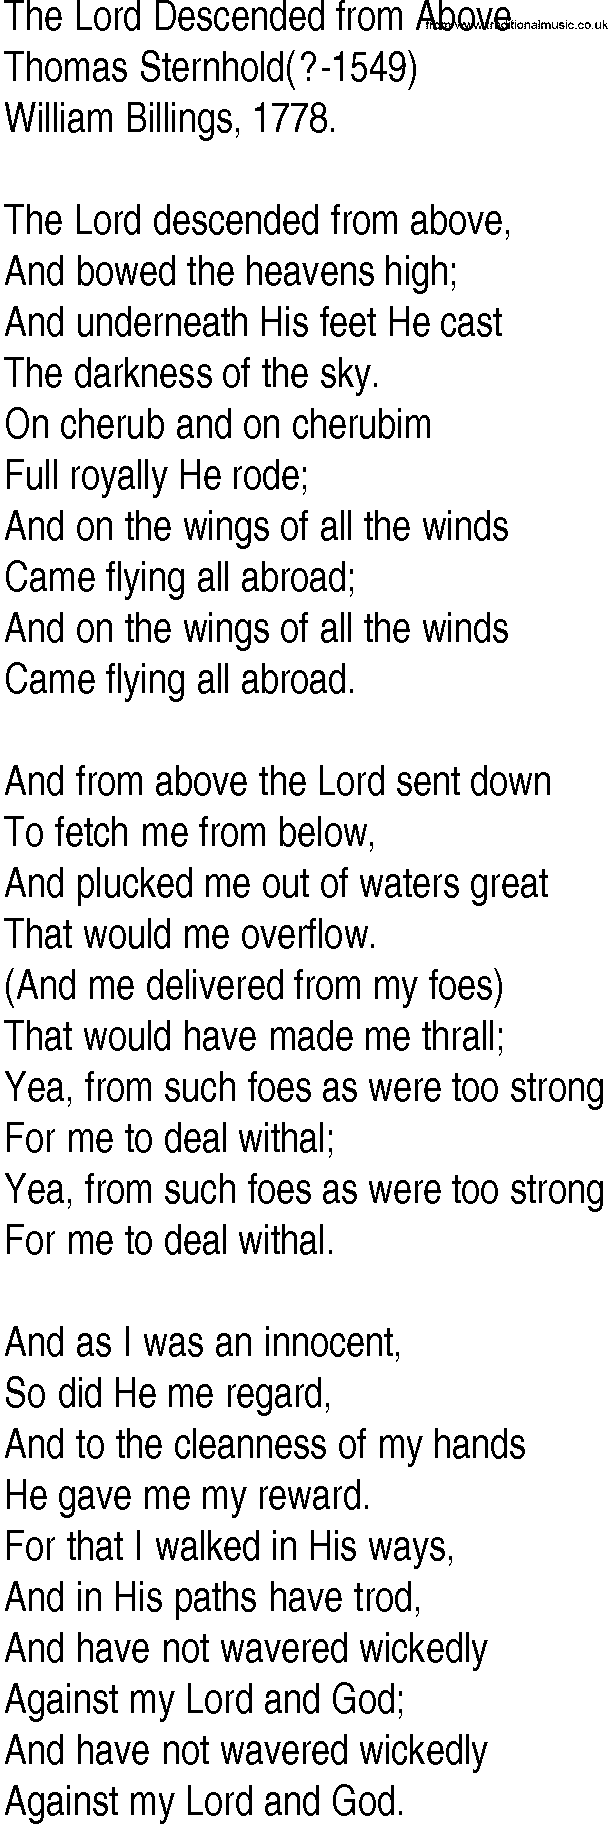 Hymn and Gospel Song: The Lord Descended from Above by Thomas Sternhold lyrics